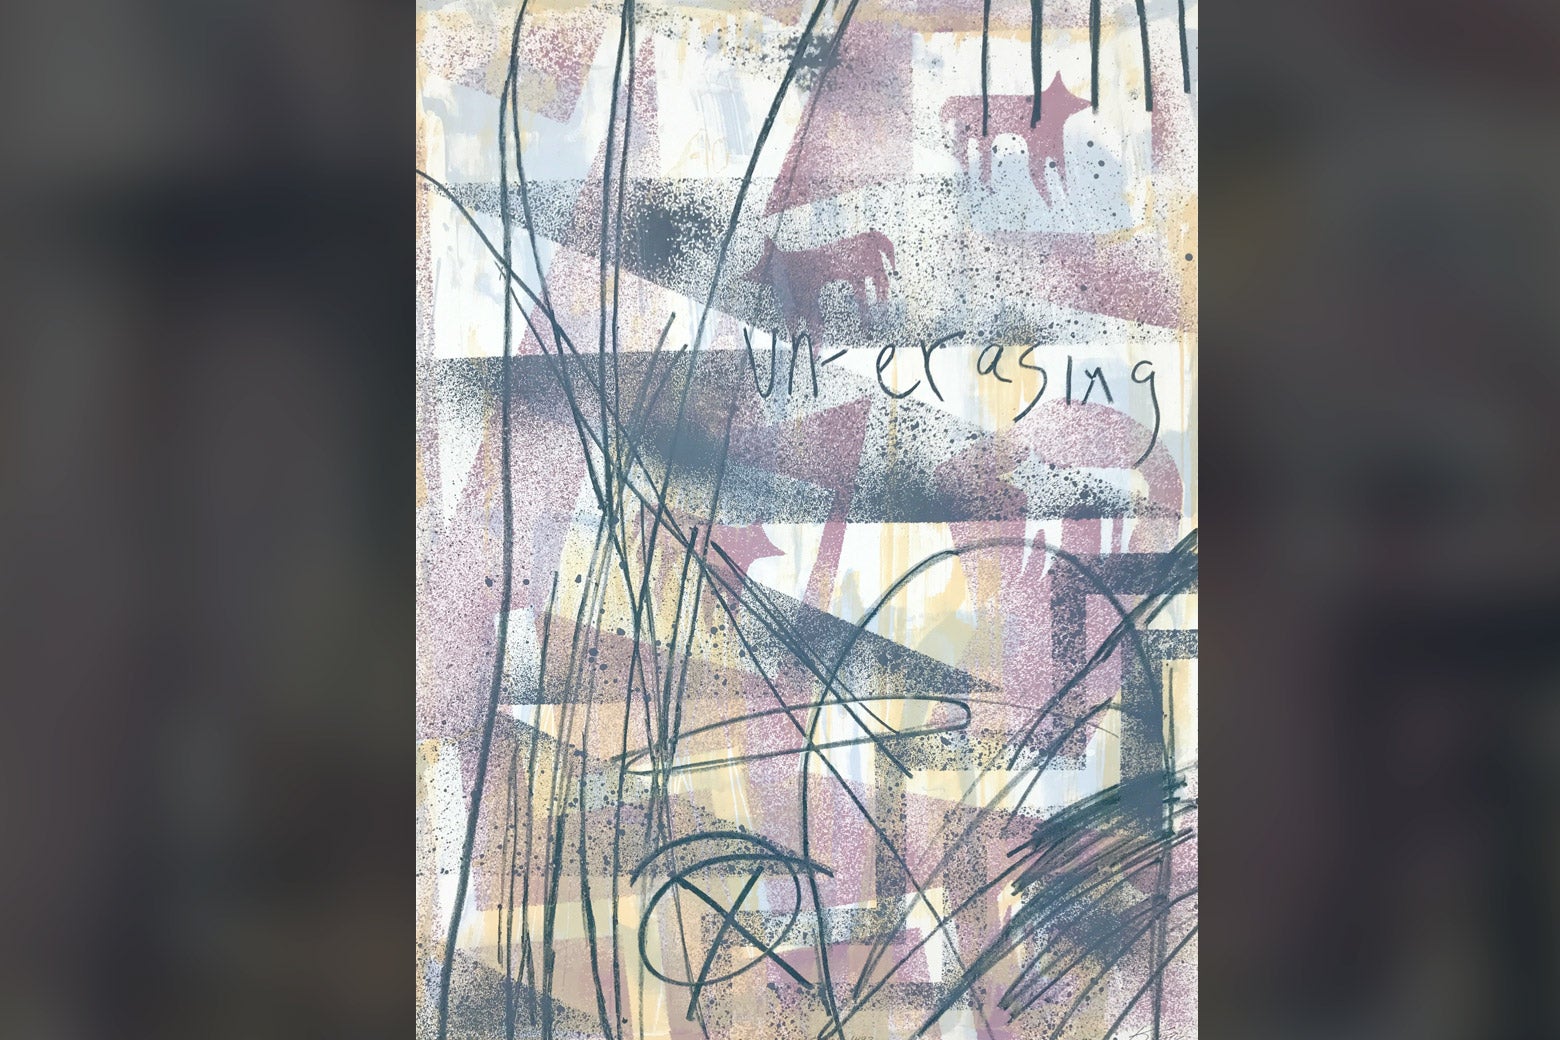 An abstract painting that features the phrase "un-erasing."